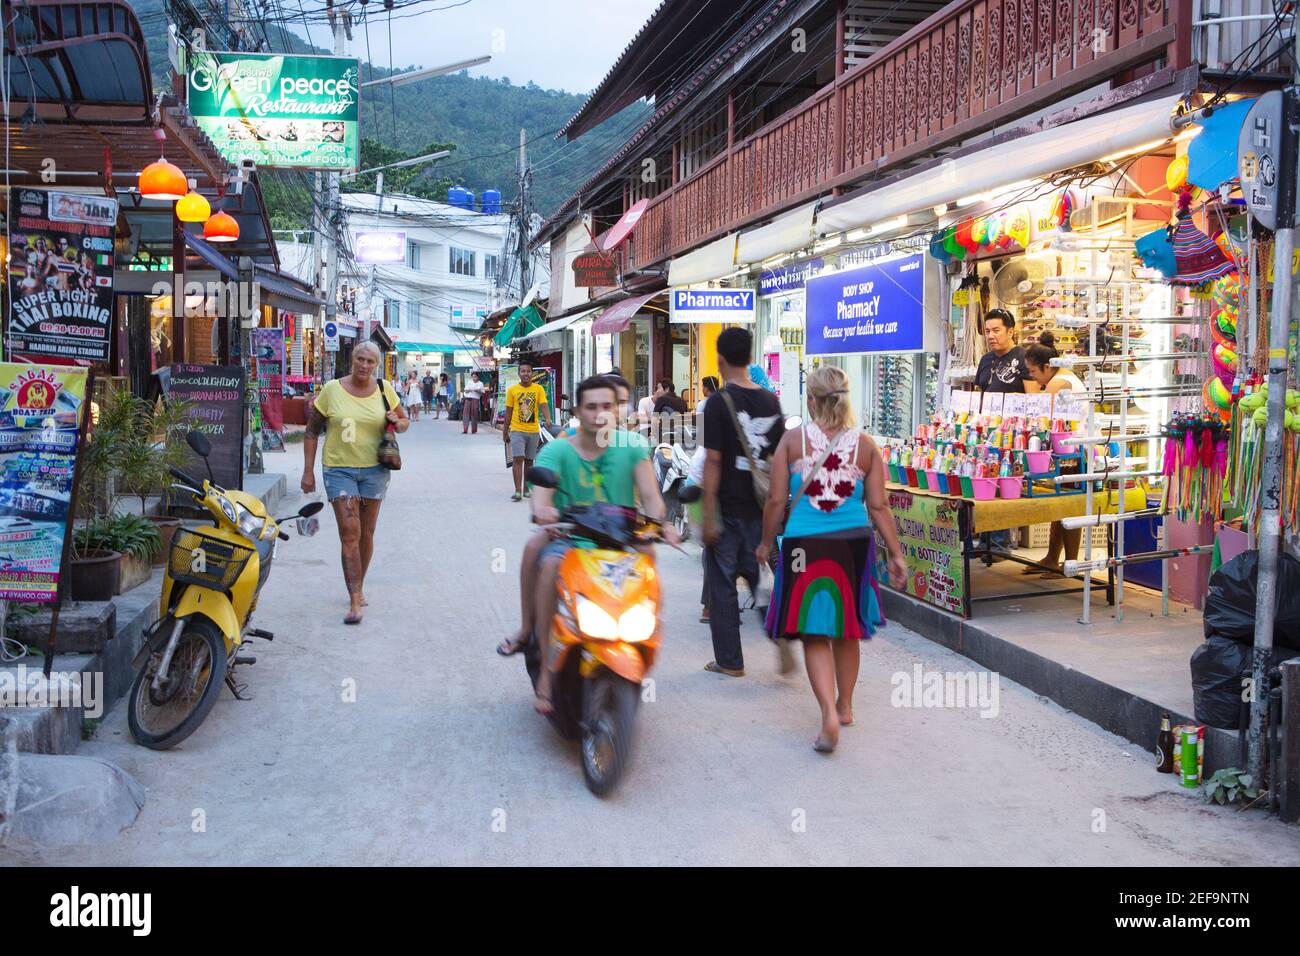 Tourists in a busy backstreet lined with shops, bars, restaurants and stores, Koh Phangan island, Thailand, Southeast Asia Stock Photo